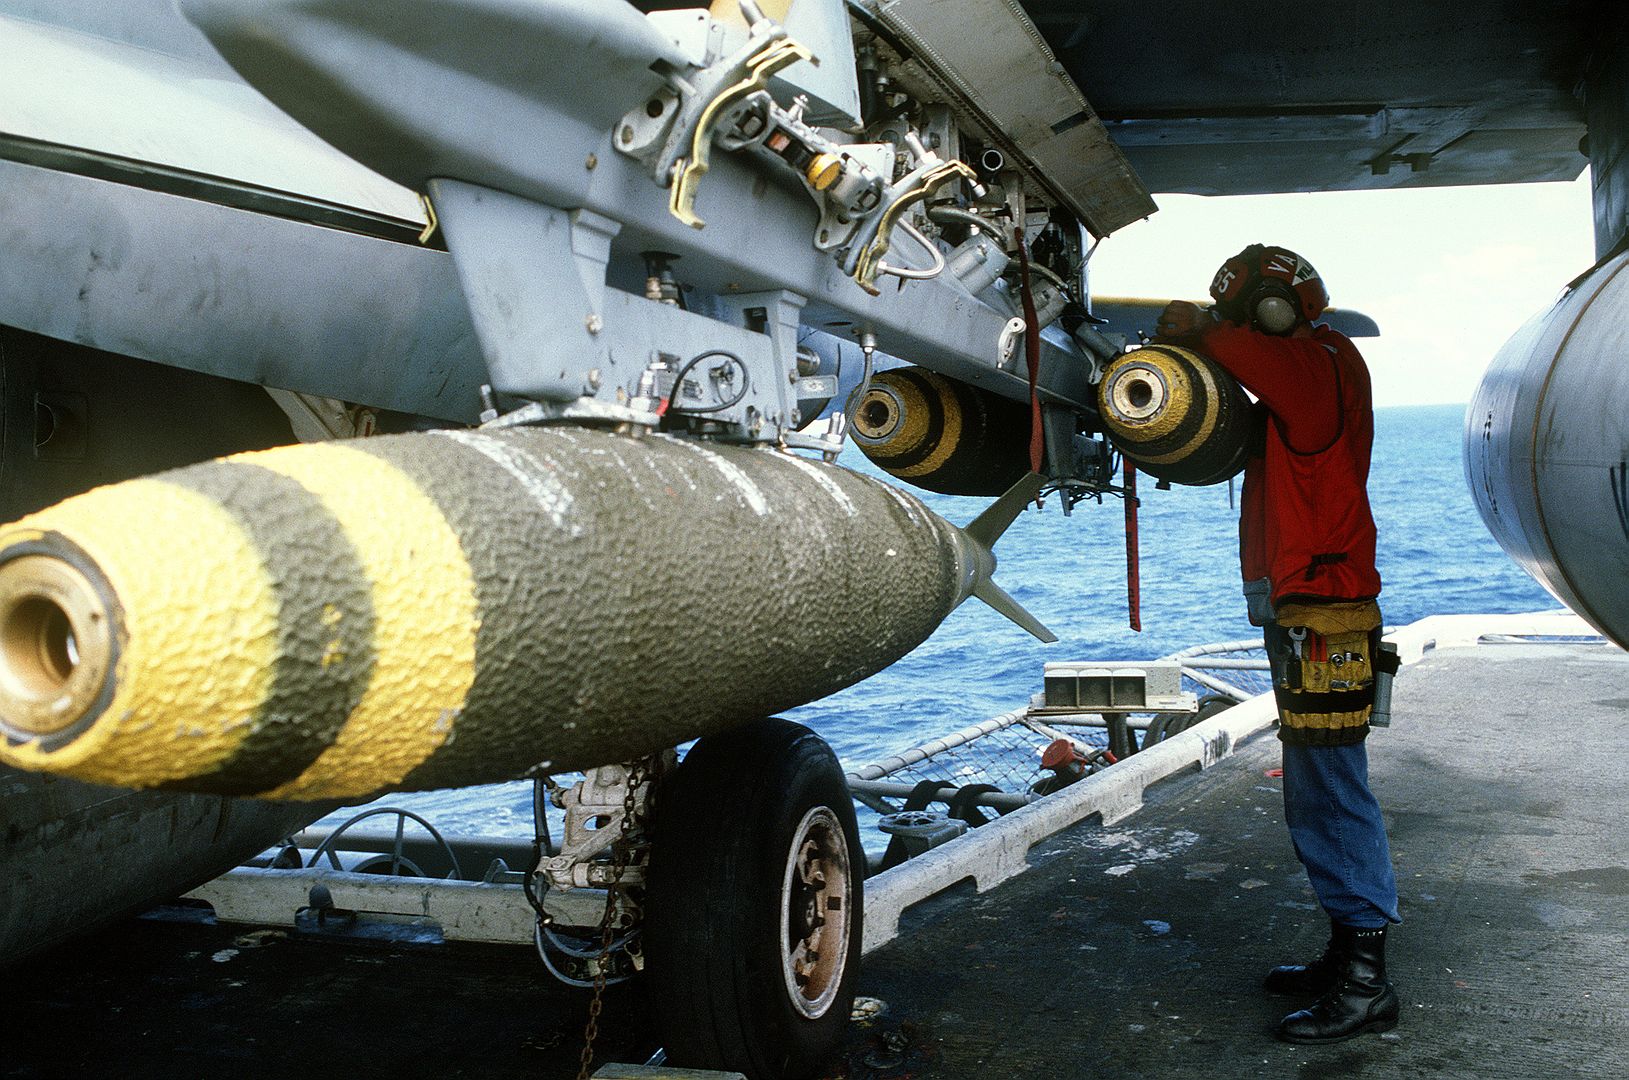 Aviation Ordnancemen Aboard The Aircraft Carrier USS CORAL SEA Load Mark 82 500 Pound Bombs On An Attack Squadron 55 A 6E Intruder Aircraft Prior To An Air Strike On Targets In Libya 1